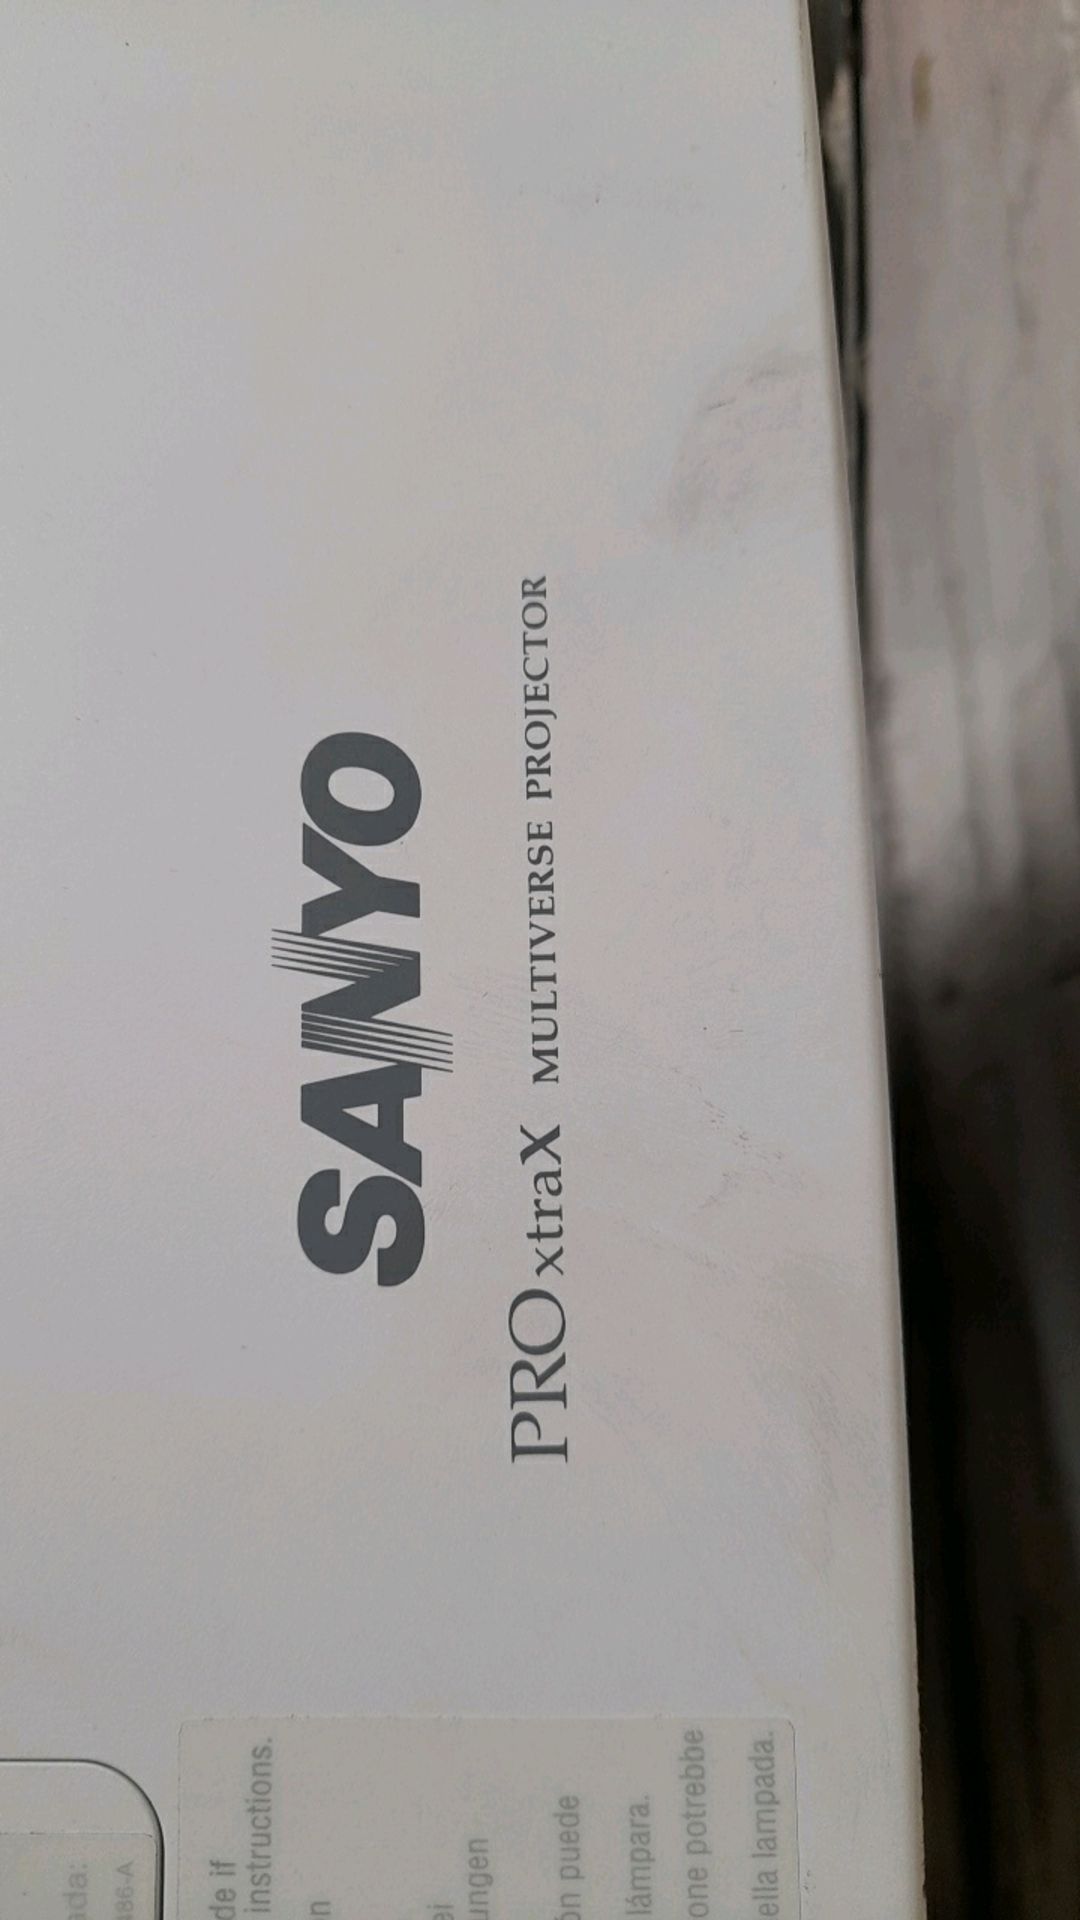 Sanyo Multiverse Pro xtrax projector - Image 6 of 6